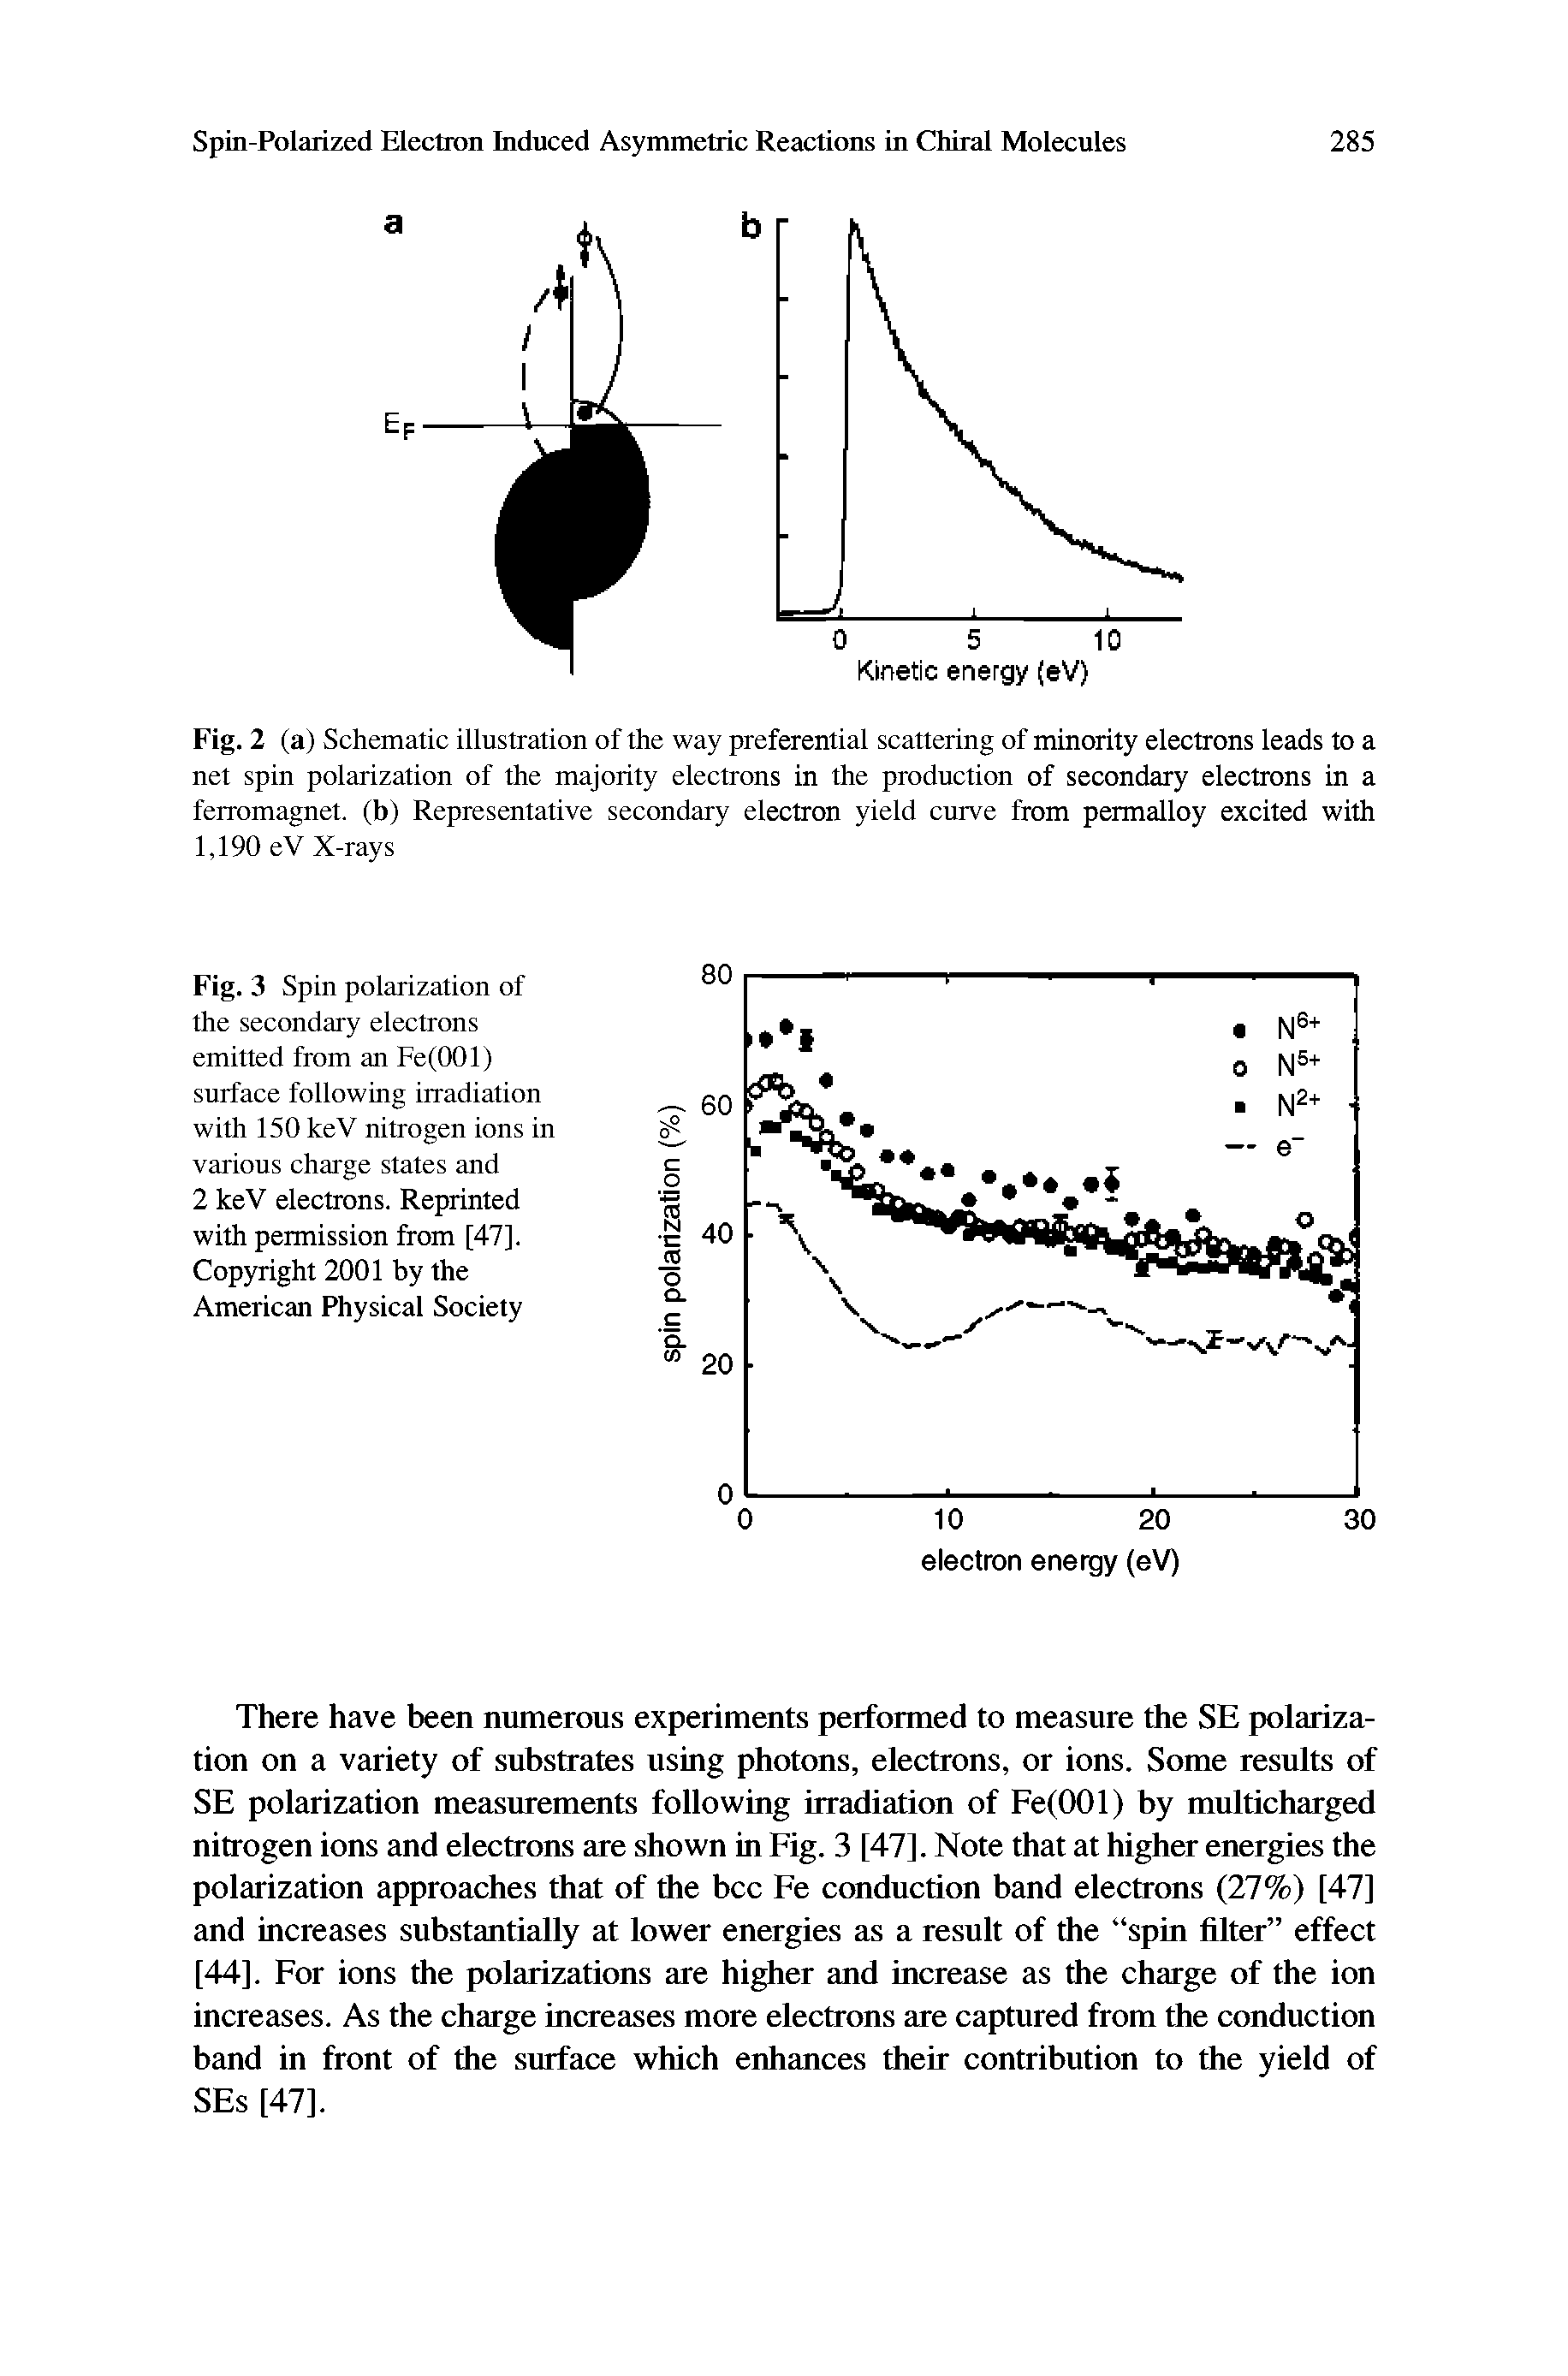 Fig. 3 Spin polarization of the secondary electrons emitted from an Fe(001) surface following irradiation with 150 keV nitrogen ions in various charge states and 2 keV electrons. Reprinted with permission from [47]. Copyright 2001 by the American Physical Society...